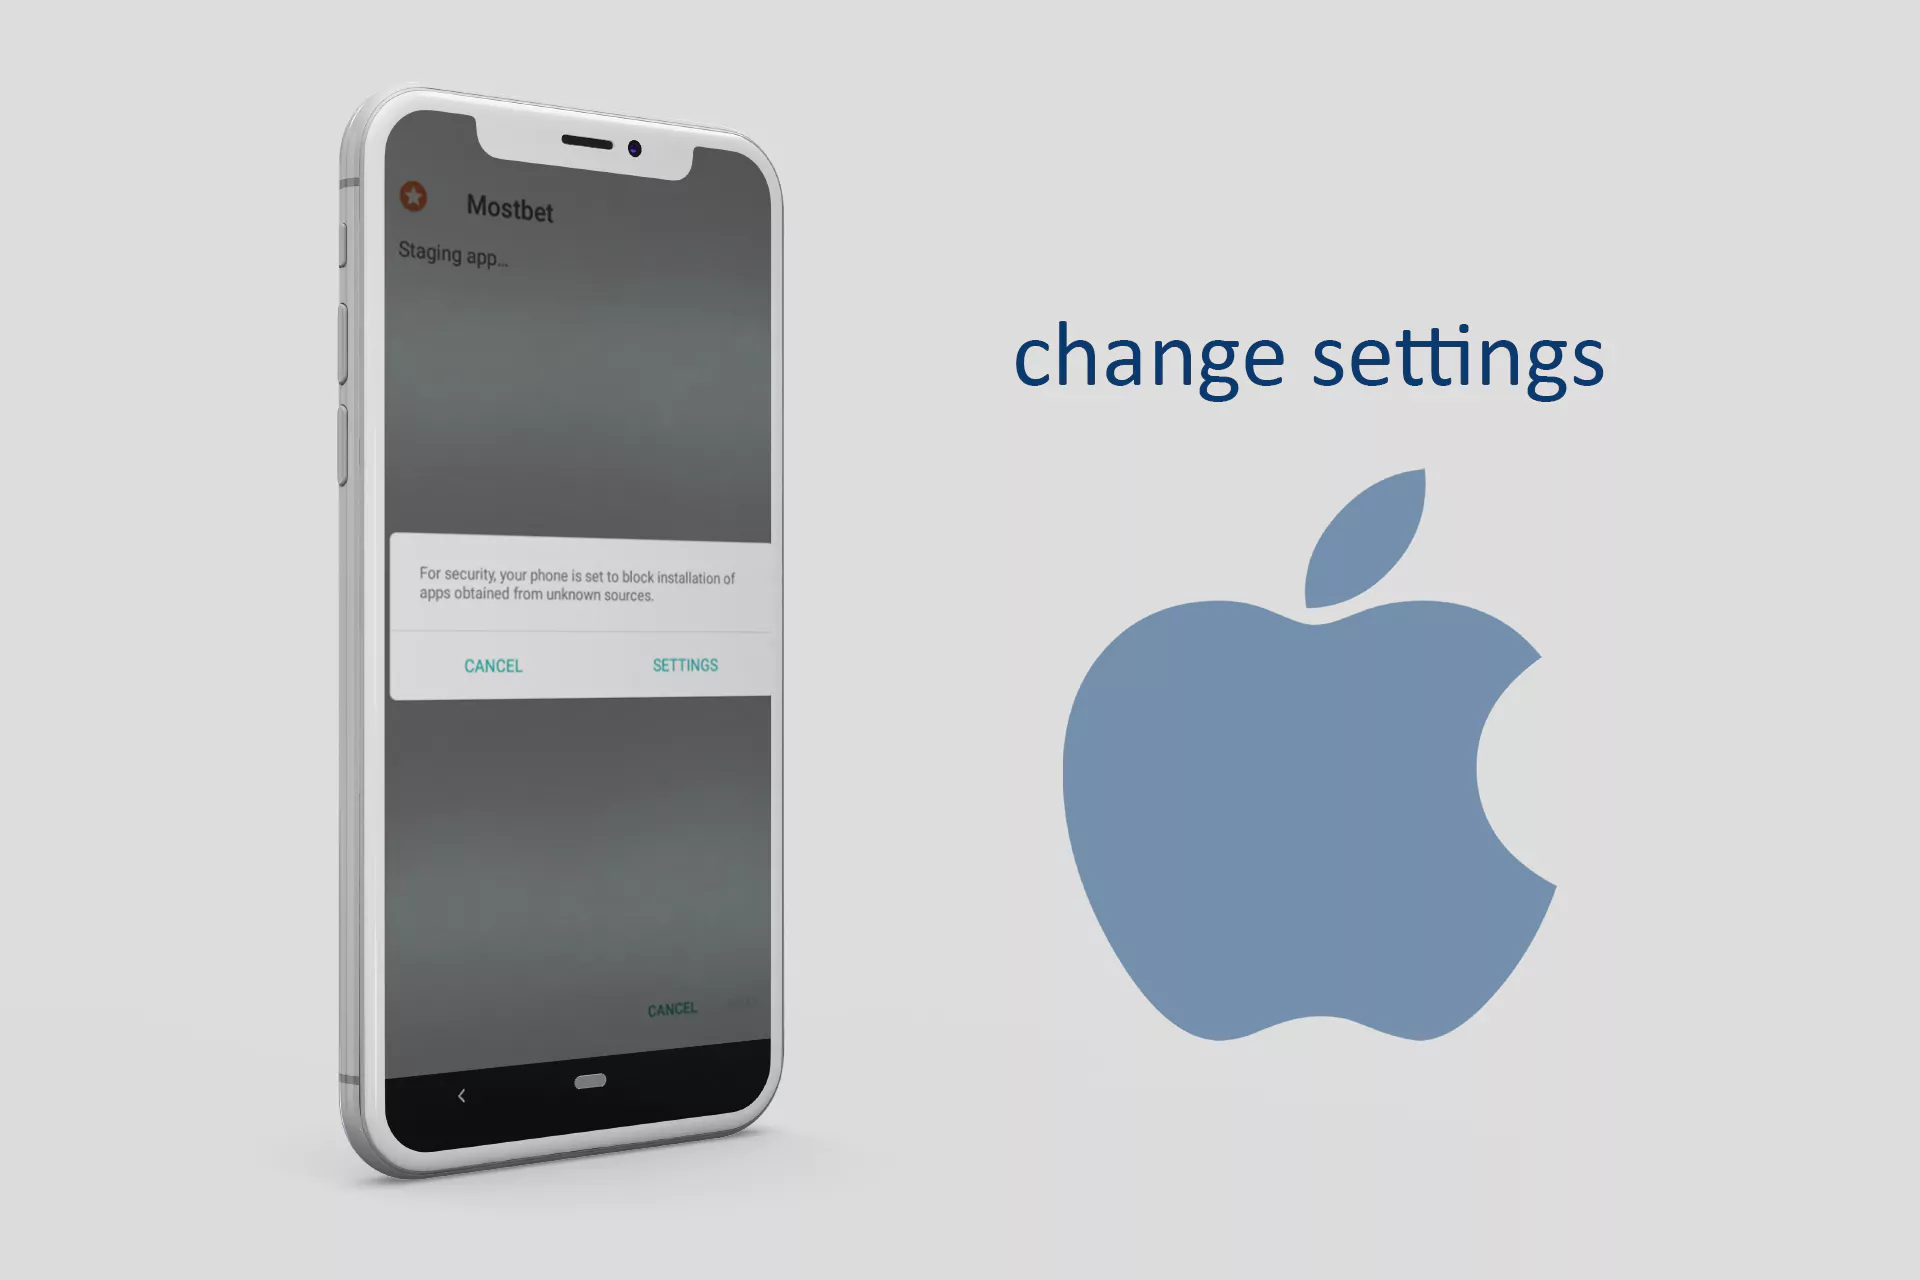 Go to the Security Settings and allow installation from unknown sources to your iPhone.